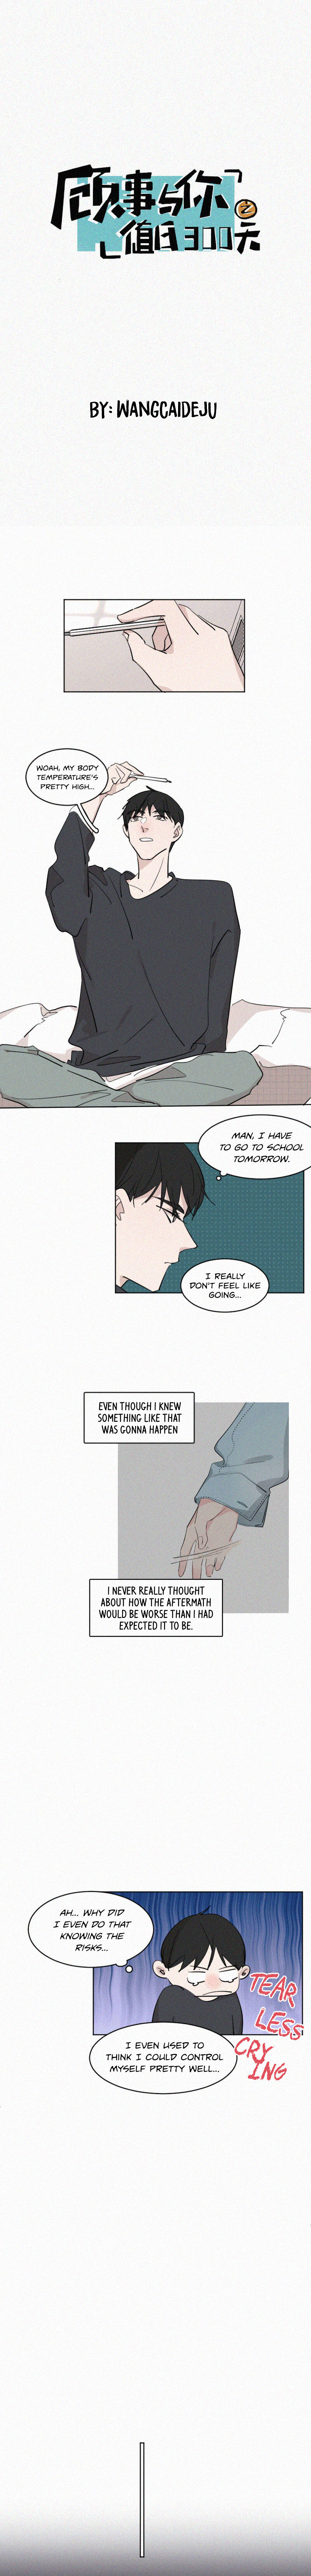 The Story About You X Me Read The Story About You X Me Chapter 46: Nothing More on Mangakakalot